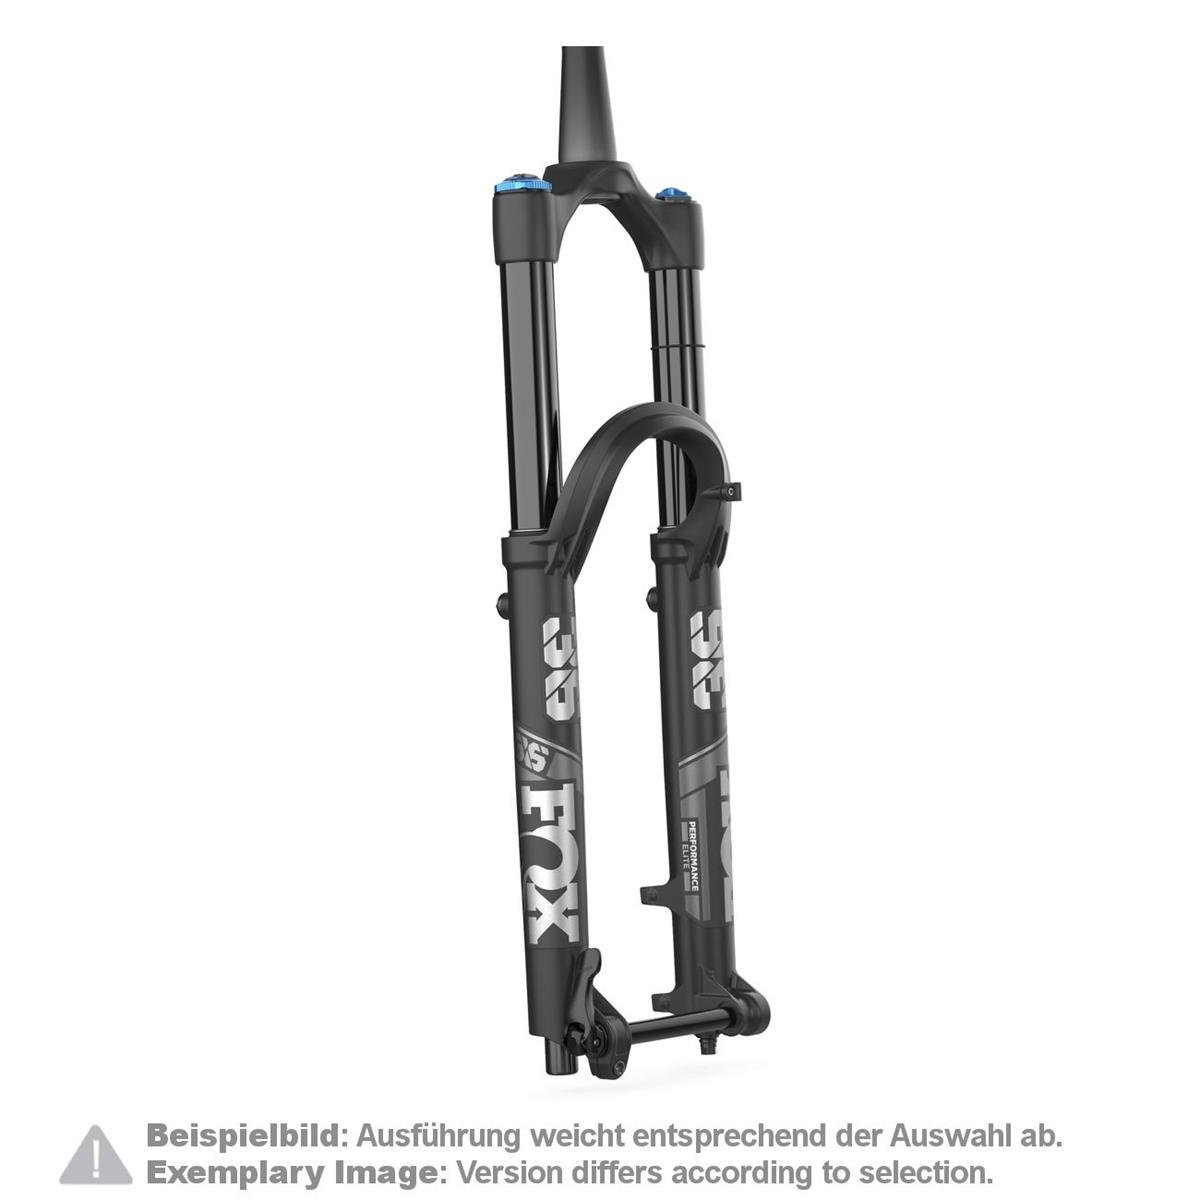 Fox Racing Shox Forcella 36 Float Performance Elite 27.5 Pollici, 15x110 mm, GRIP 2, 44 mm Offset, 160 mm